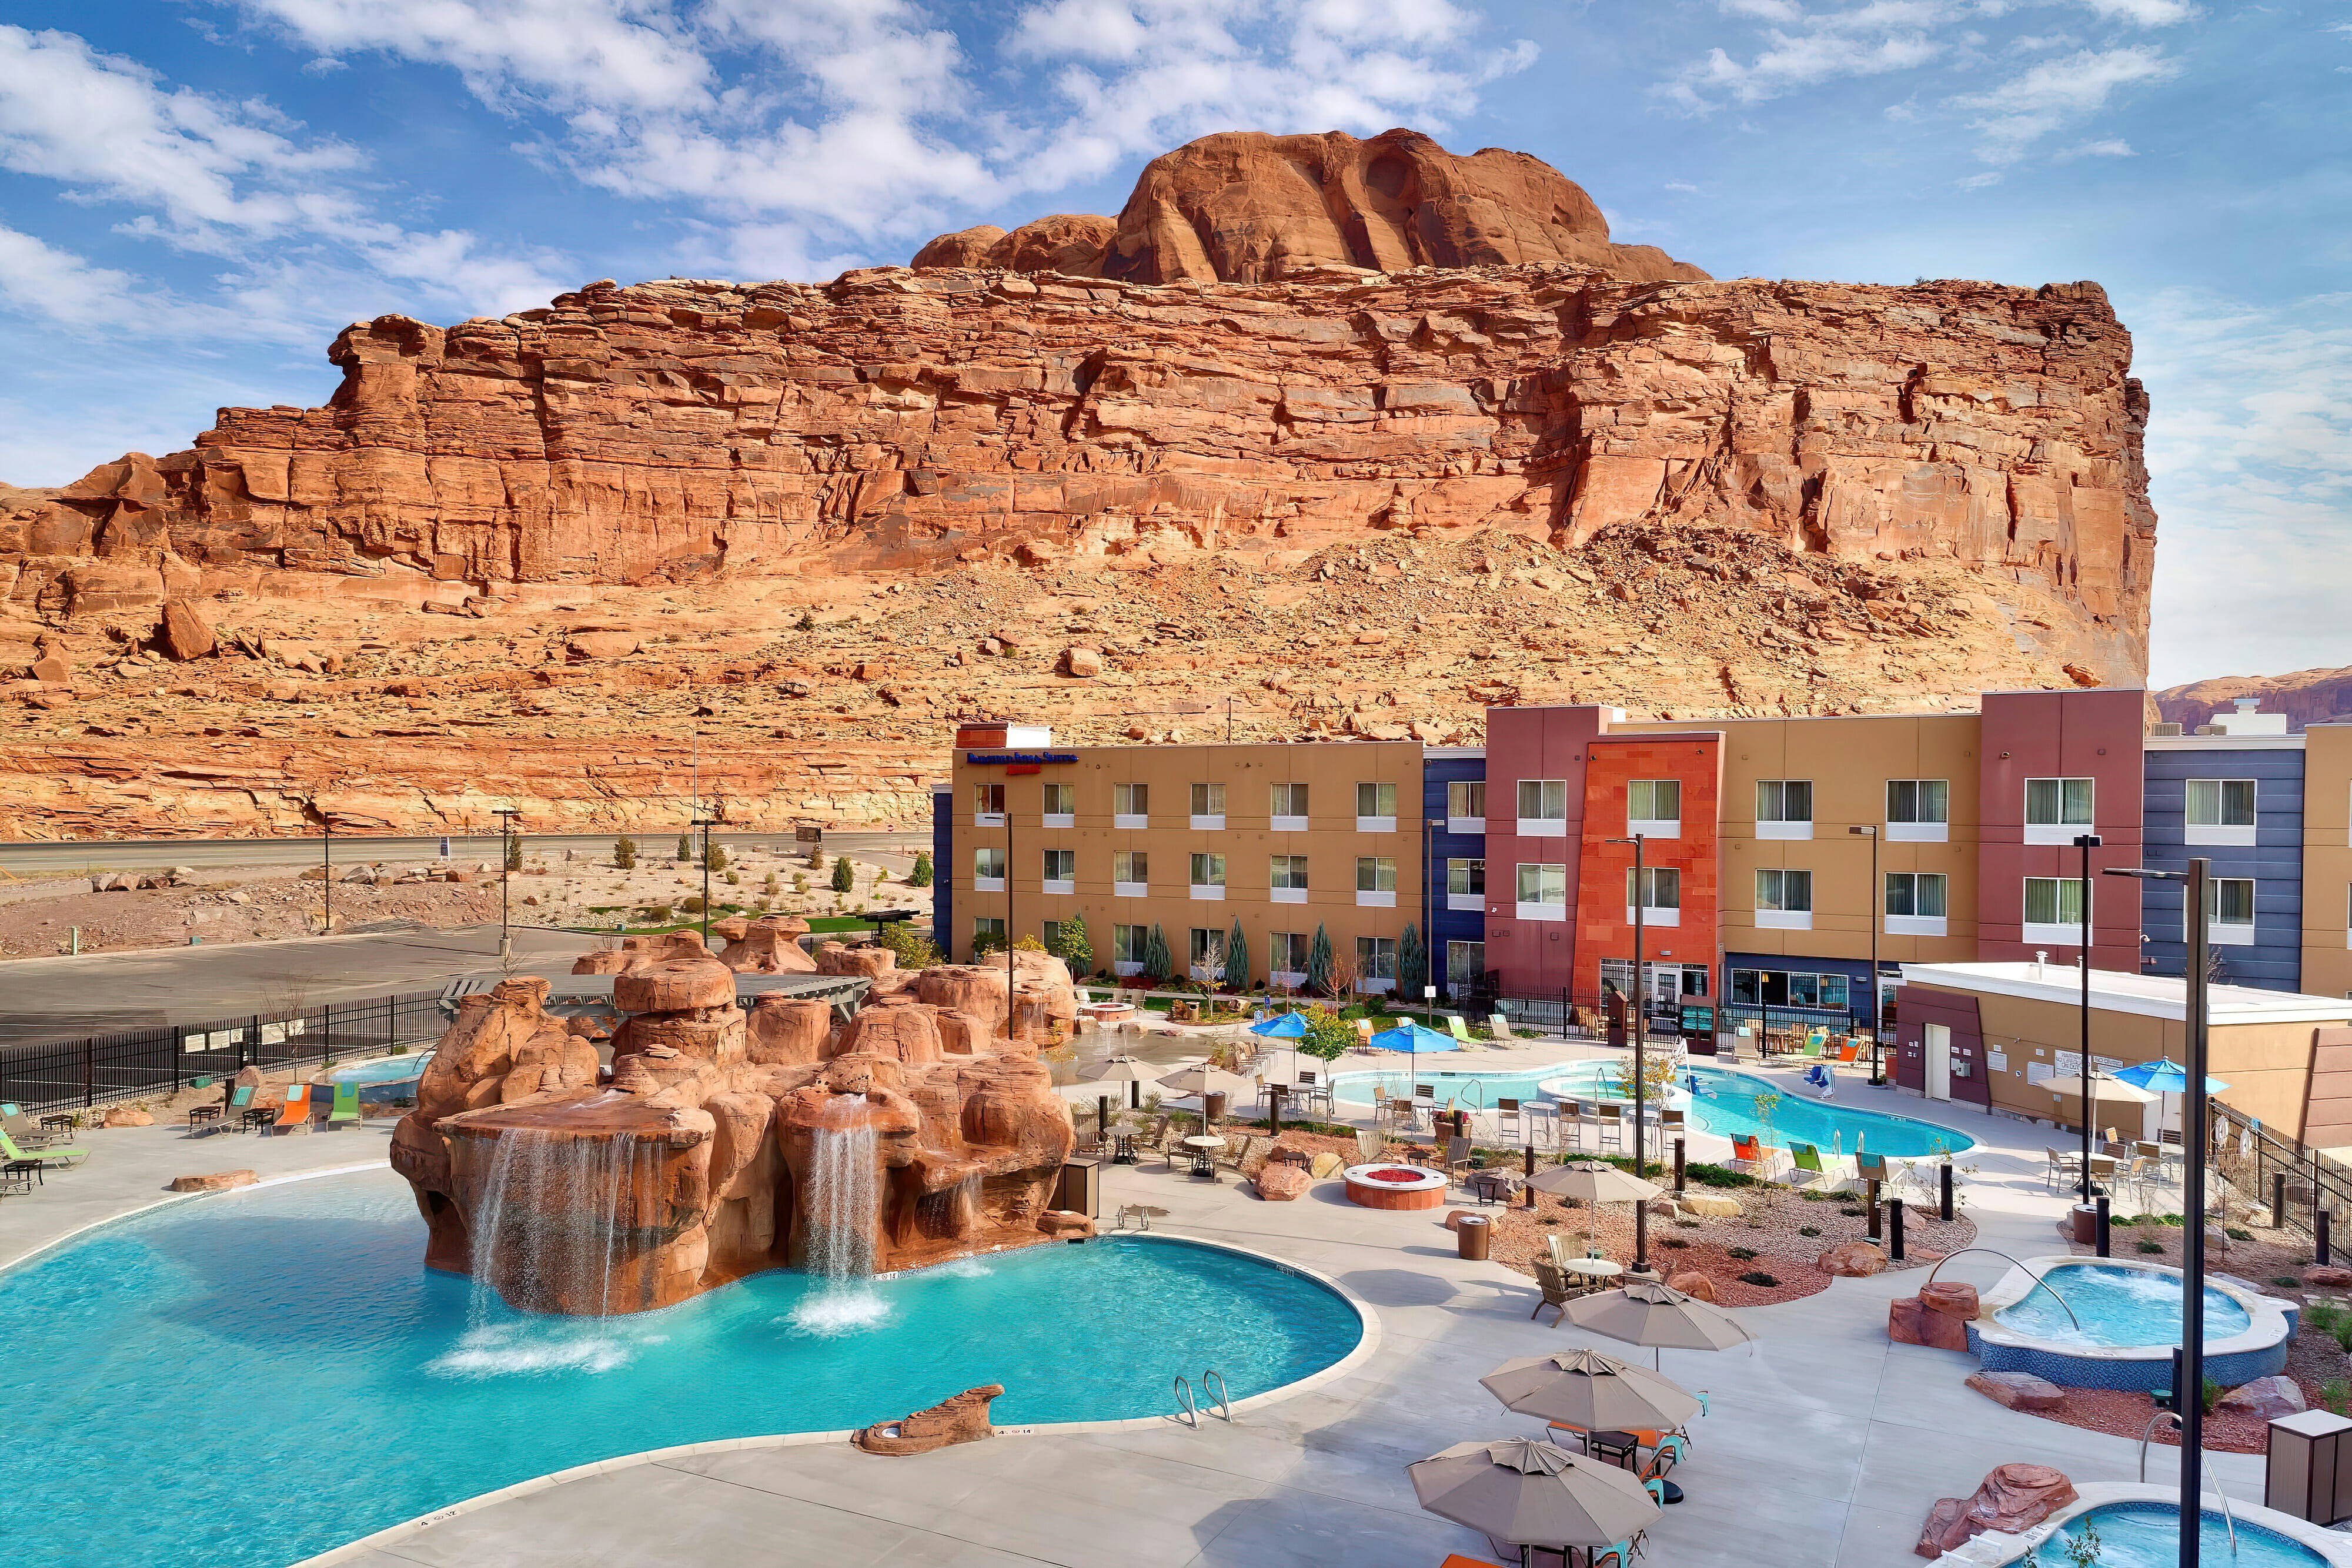 Pool view of Fairfield Inn and Suites by Marriott Moab